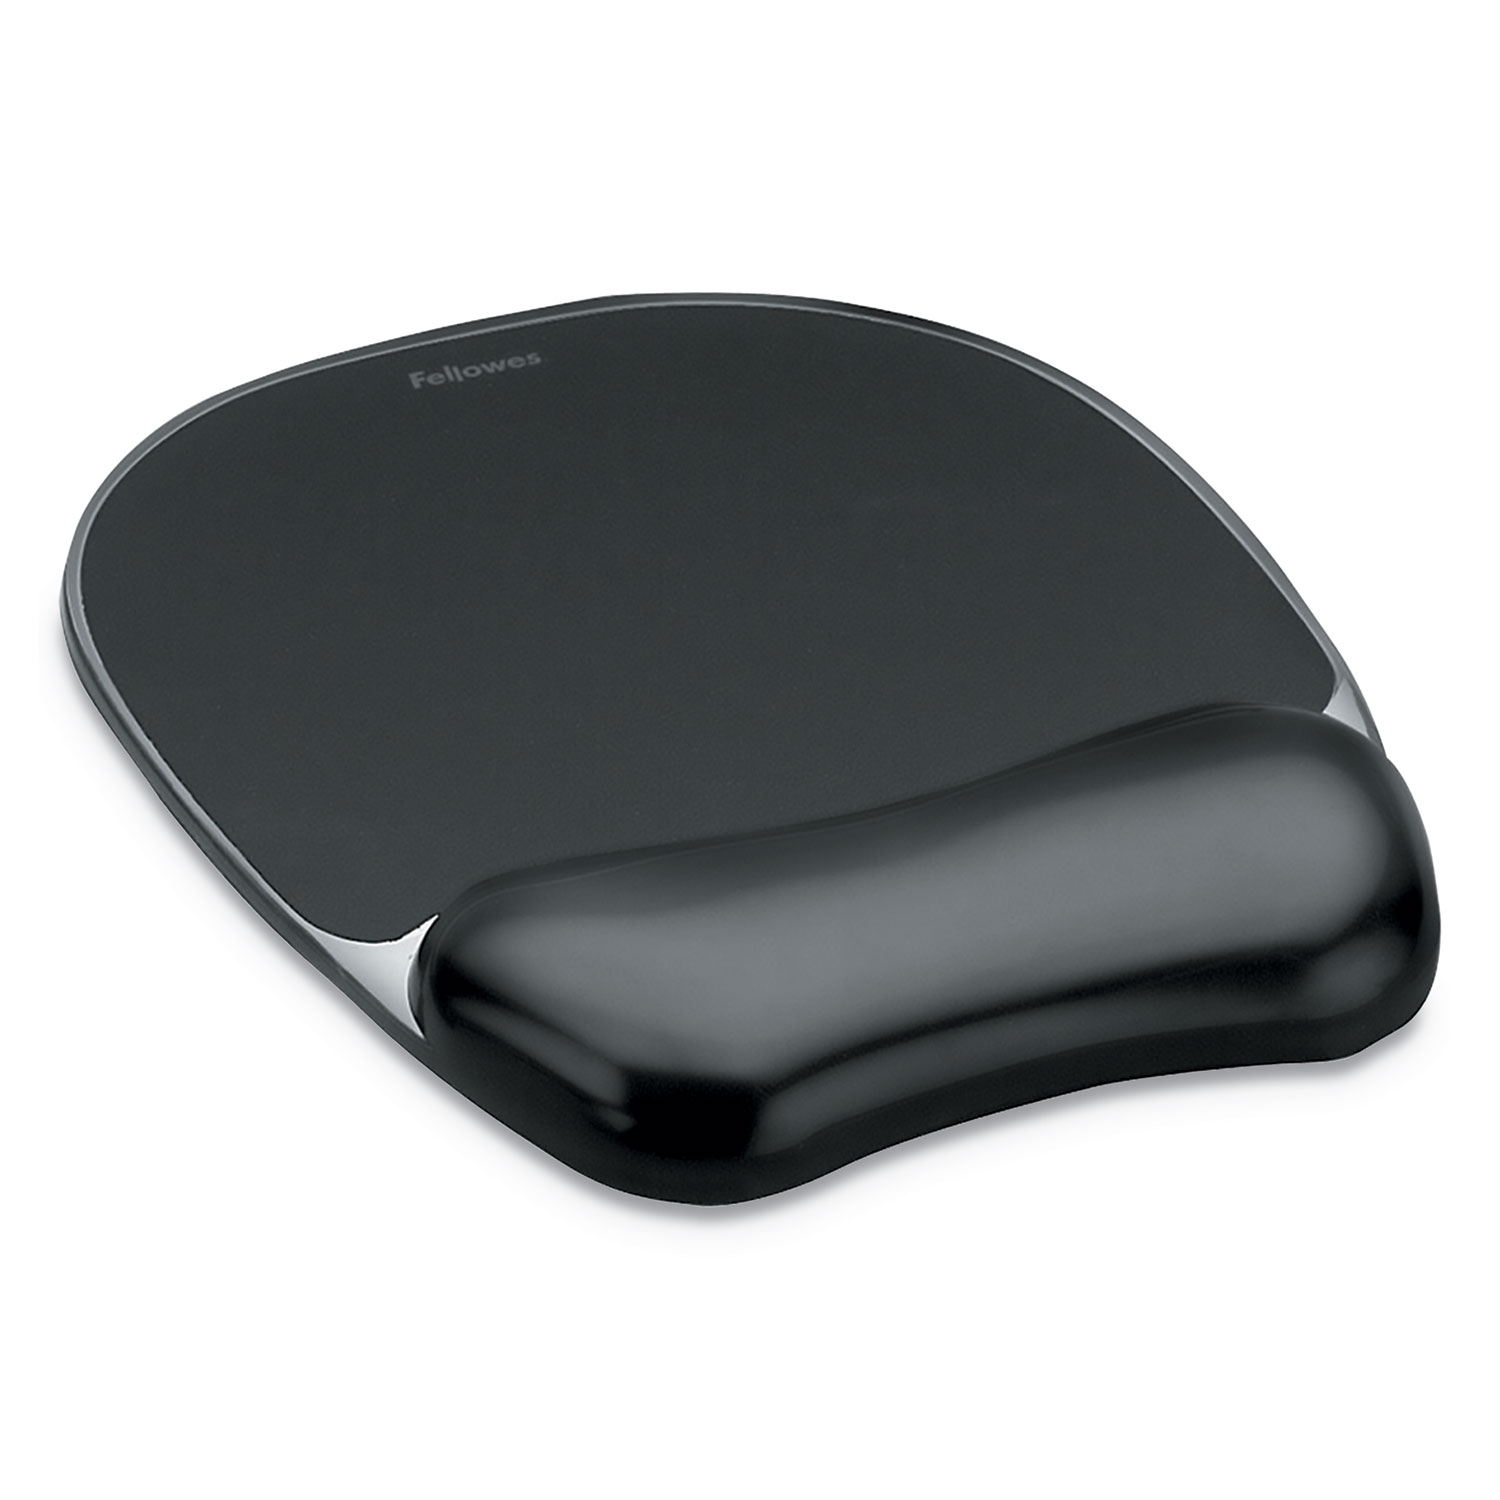  Fellowes 9112101 Gel Crystals Mouse Pad with Wrist Rest, 7.87 x 9.18, Black (FEL9112101) 